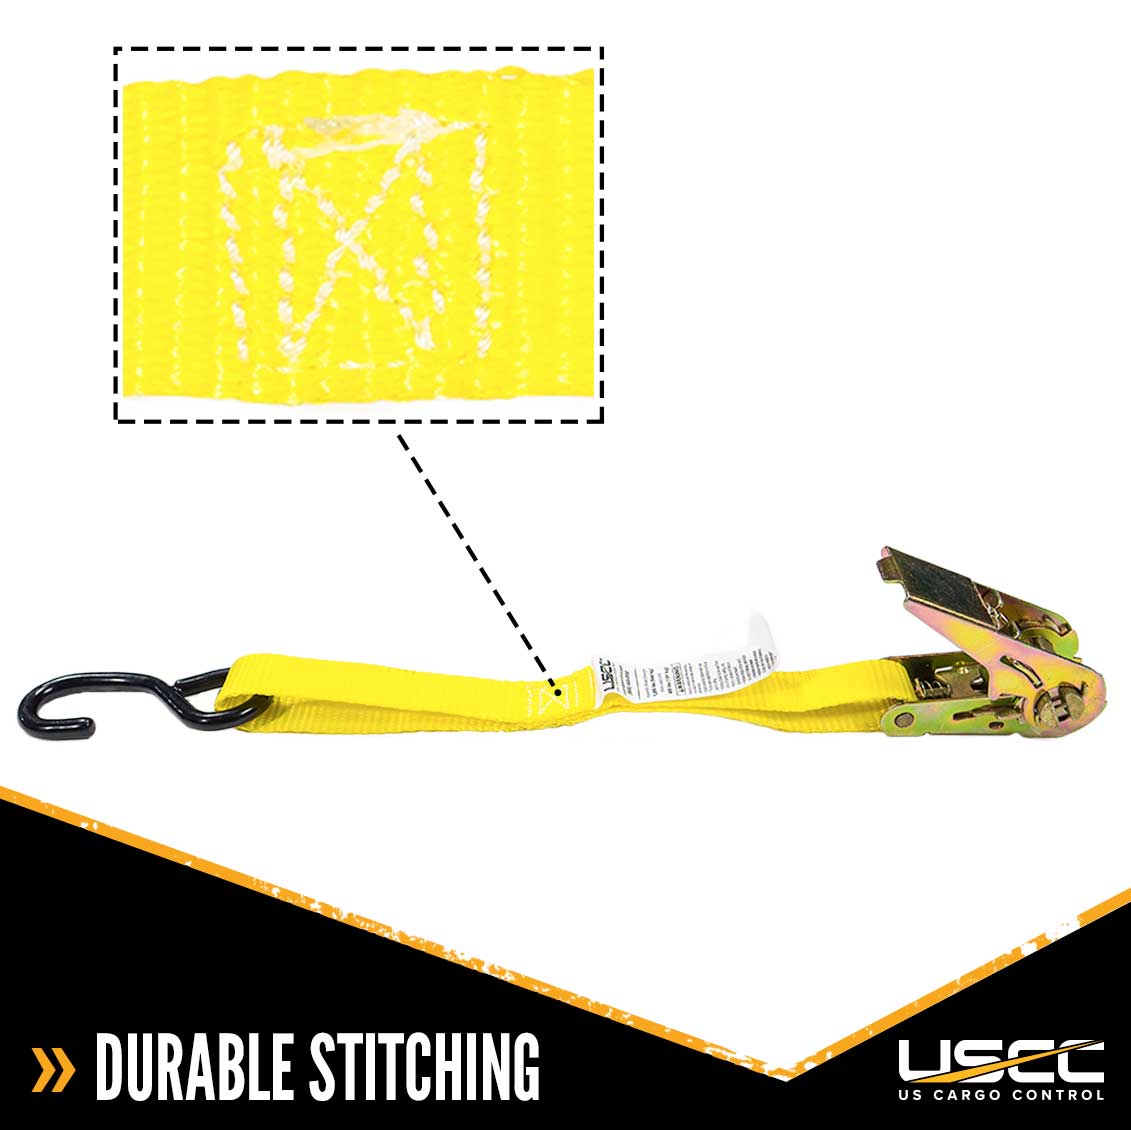 1 inch x 20 foot Ratchet Strap w SHooks (Utility) image 5 of 8